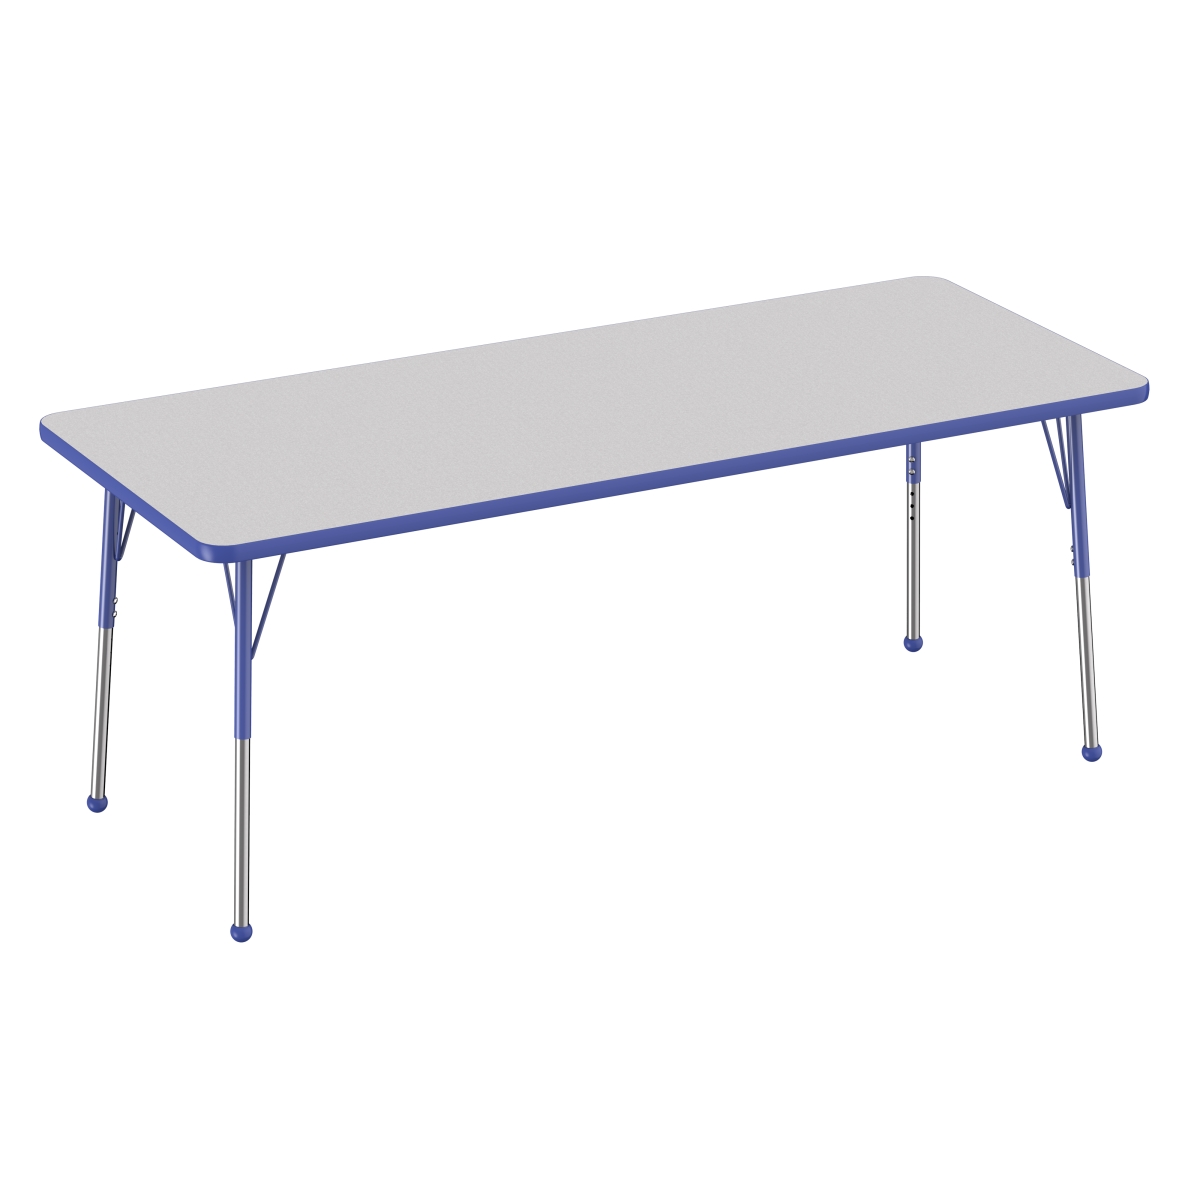 10028-gybl 30 X 72 In. Rectangle T-mold Adjustable Activity Table With Standard Ball - Grey & Blue